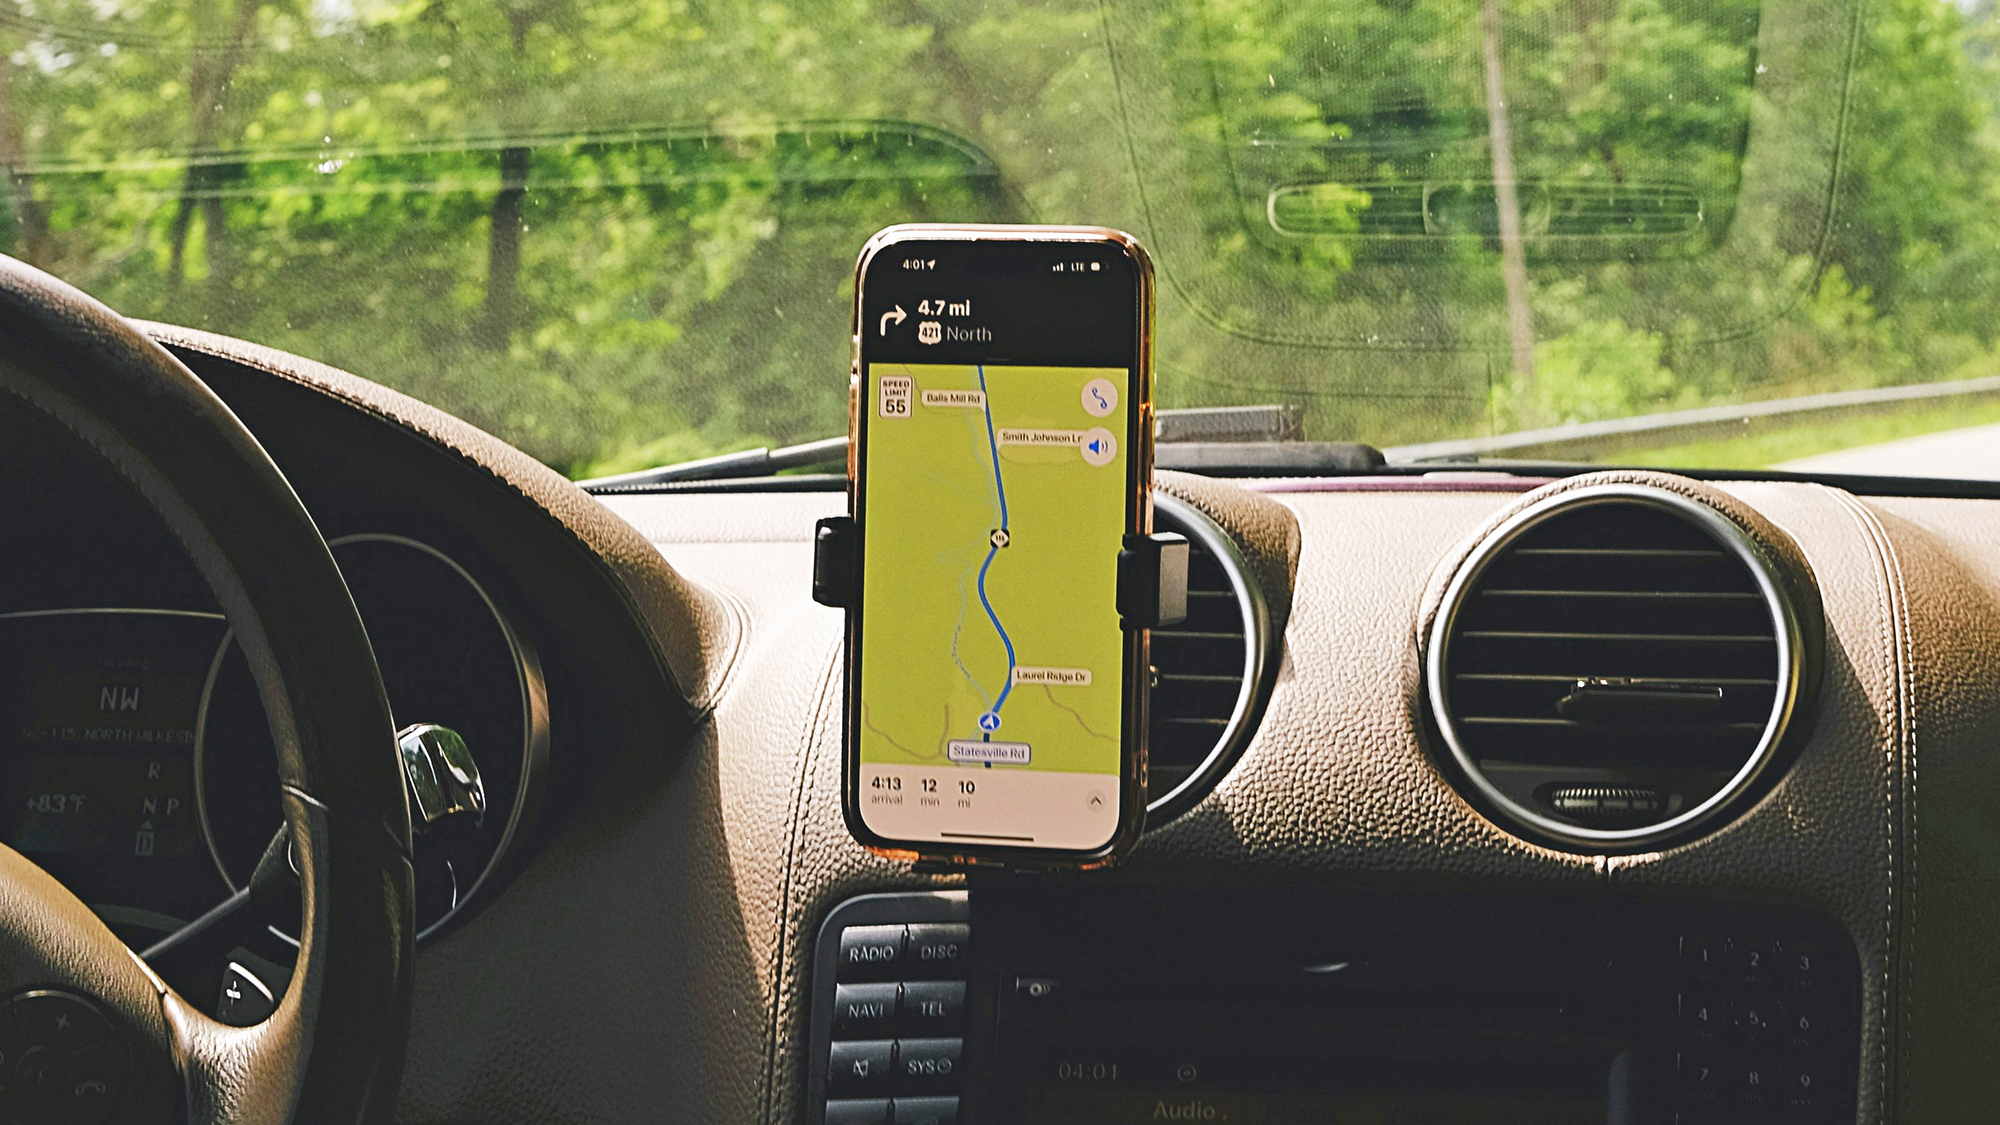 How to share your ETA in Google Maps or Apple Maps